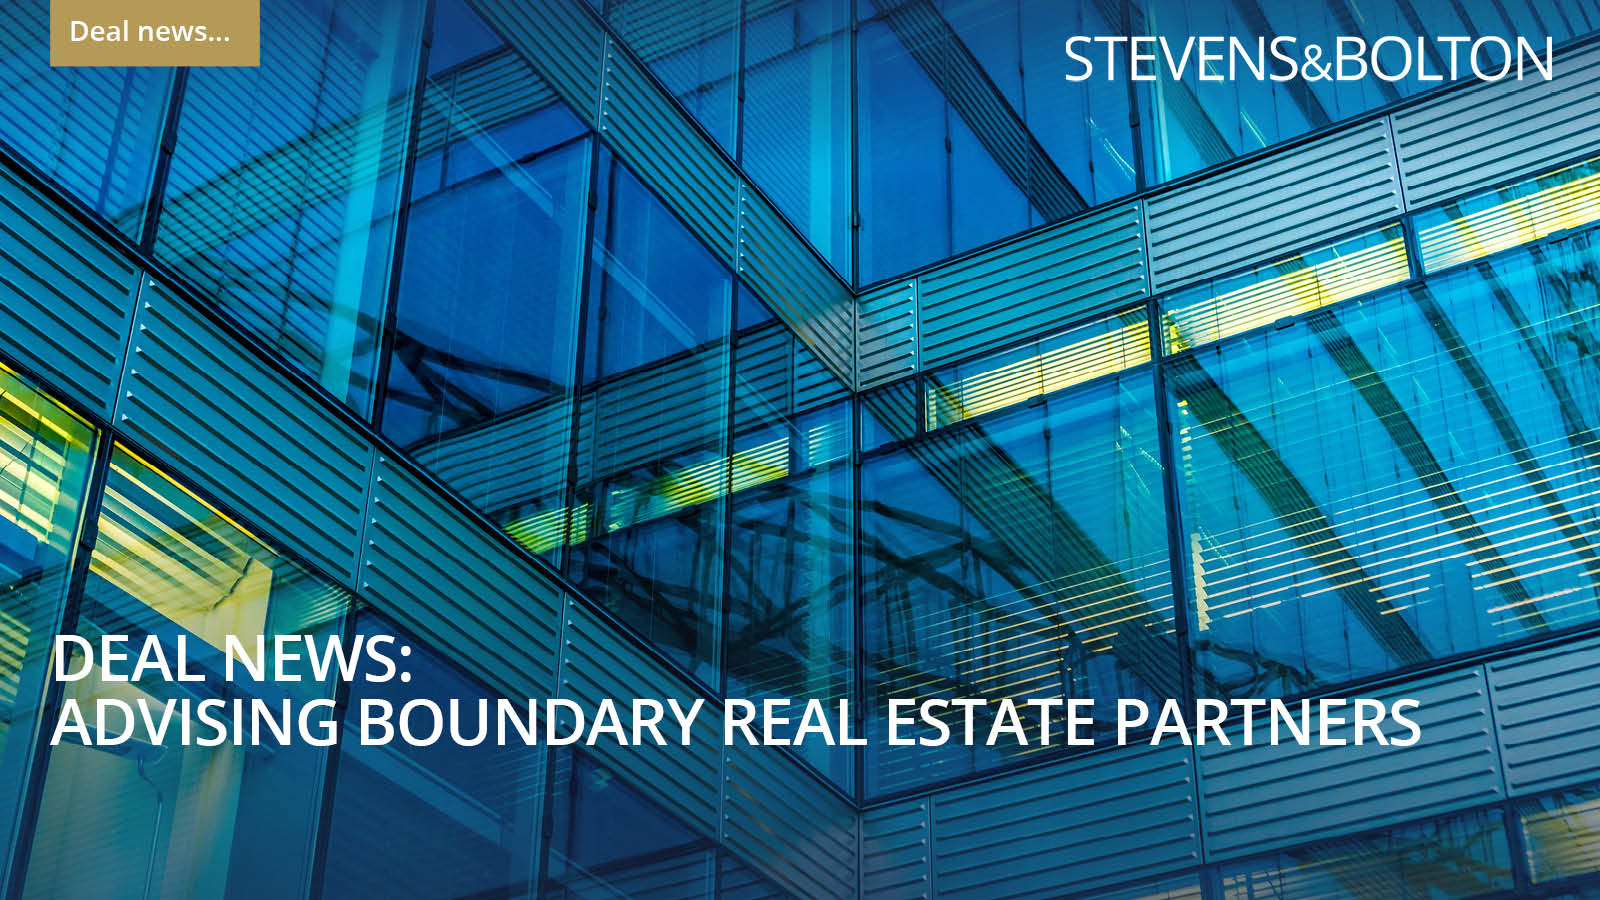 Deal news: advising Boundary Real Estate Partners on the real estate aspects of a mixed portfolio acquisition of multi-let industrial estates and offices